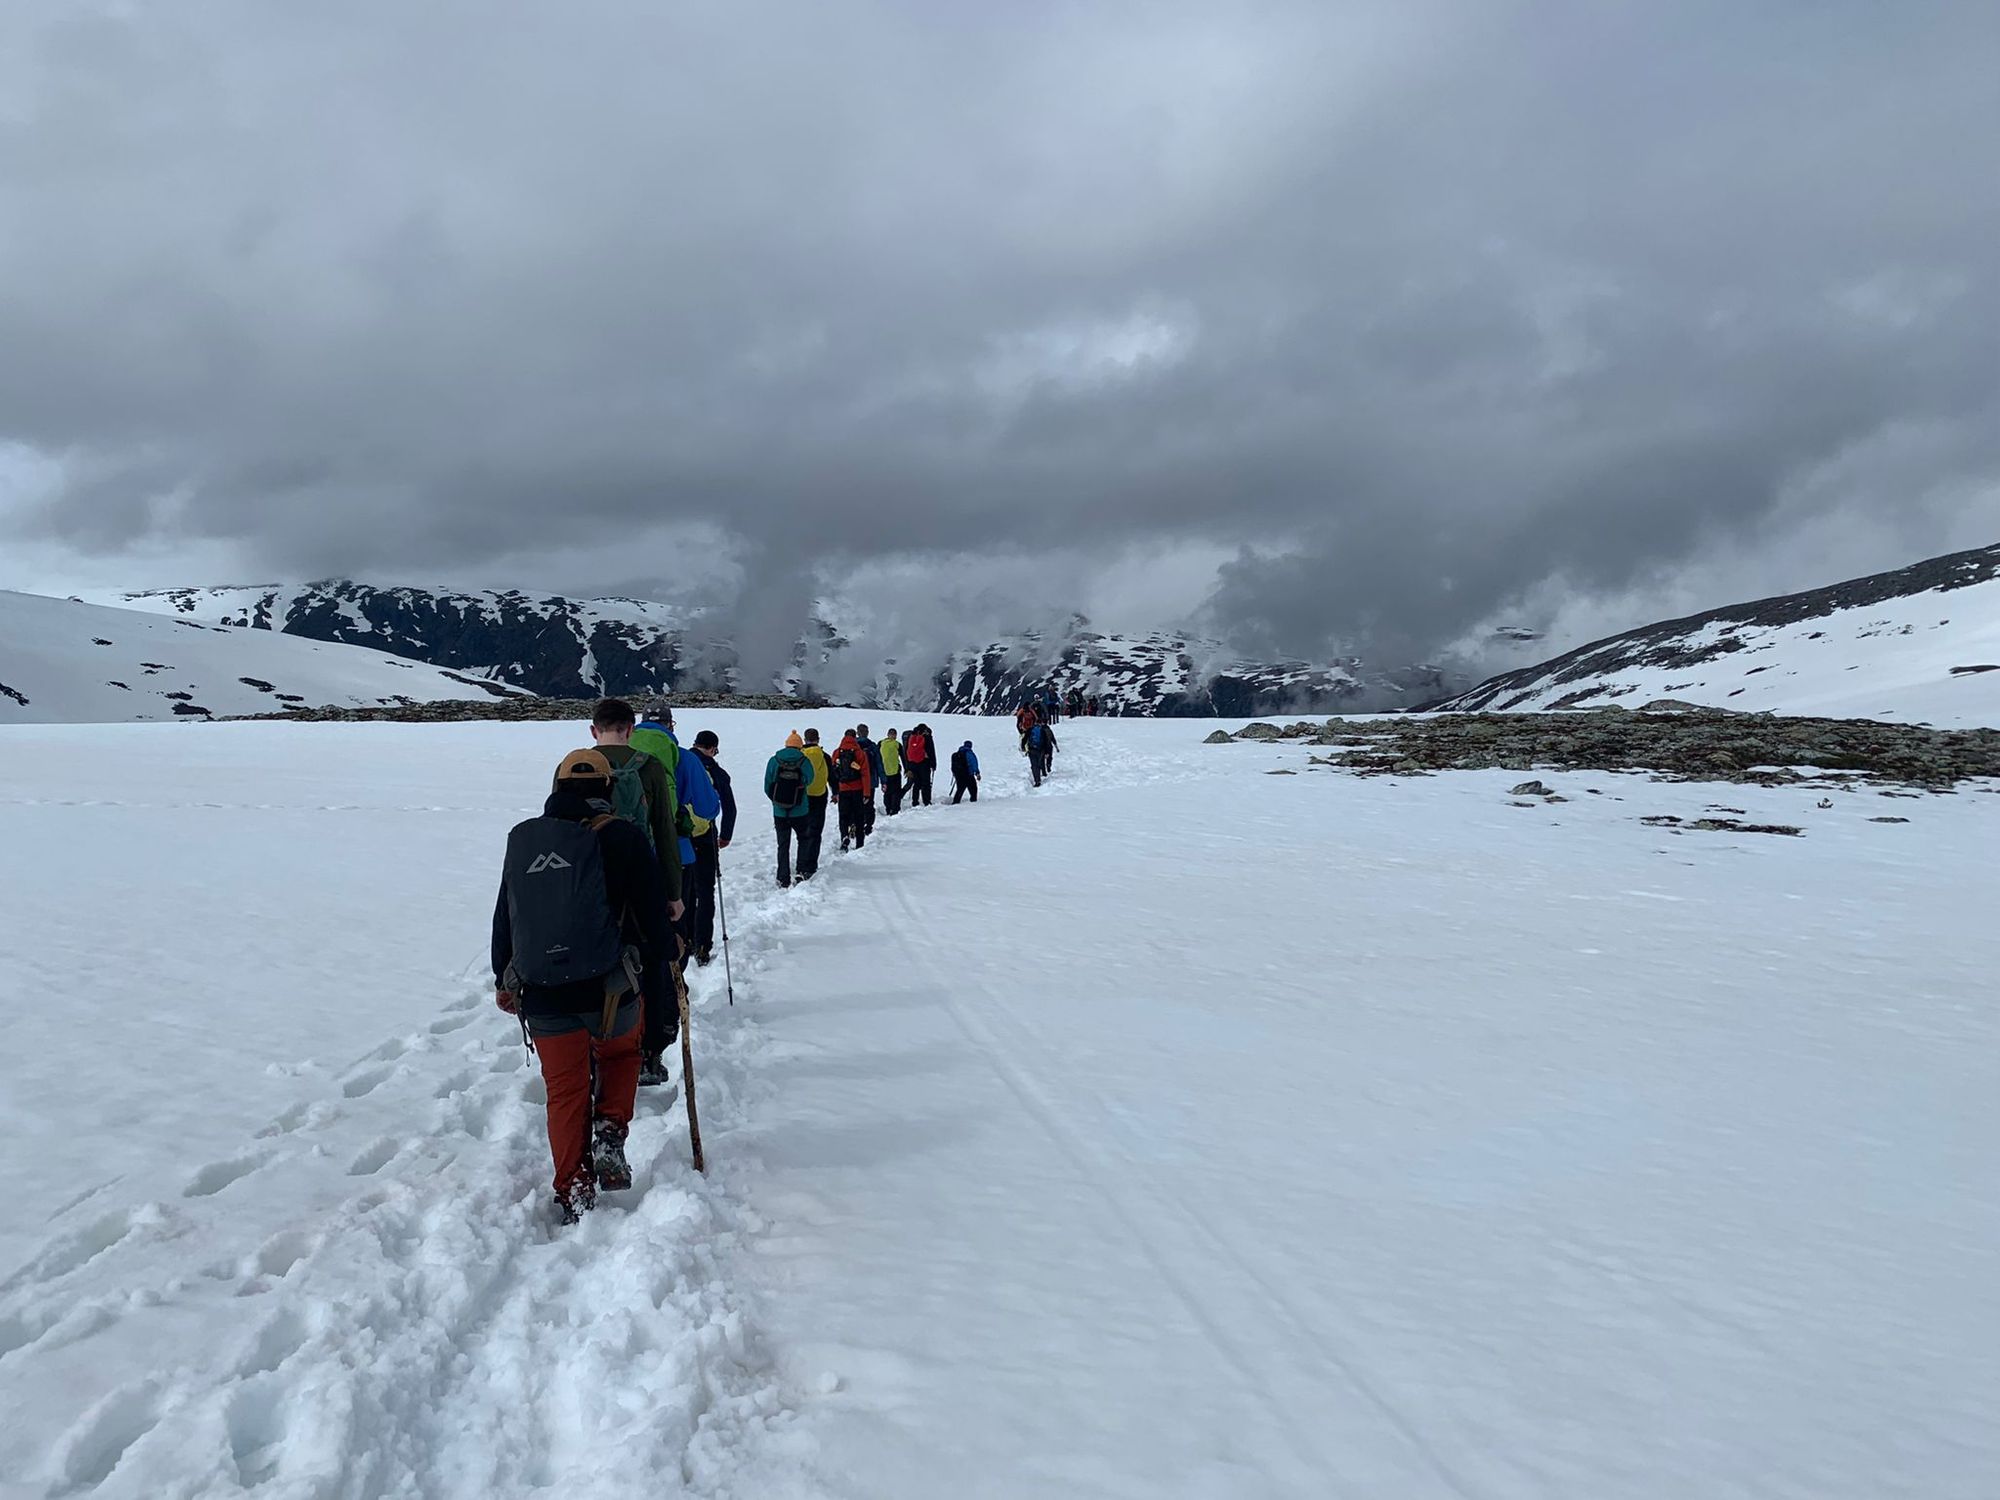 Hikers trudging through snow in the Norwegian fjords